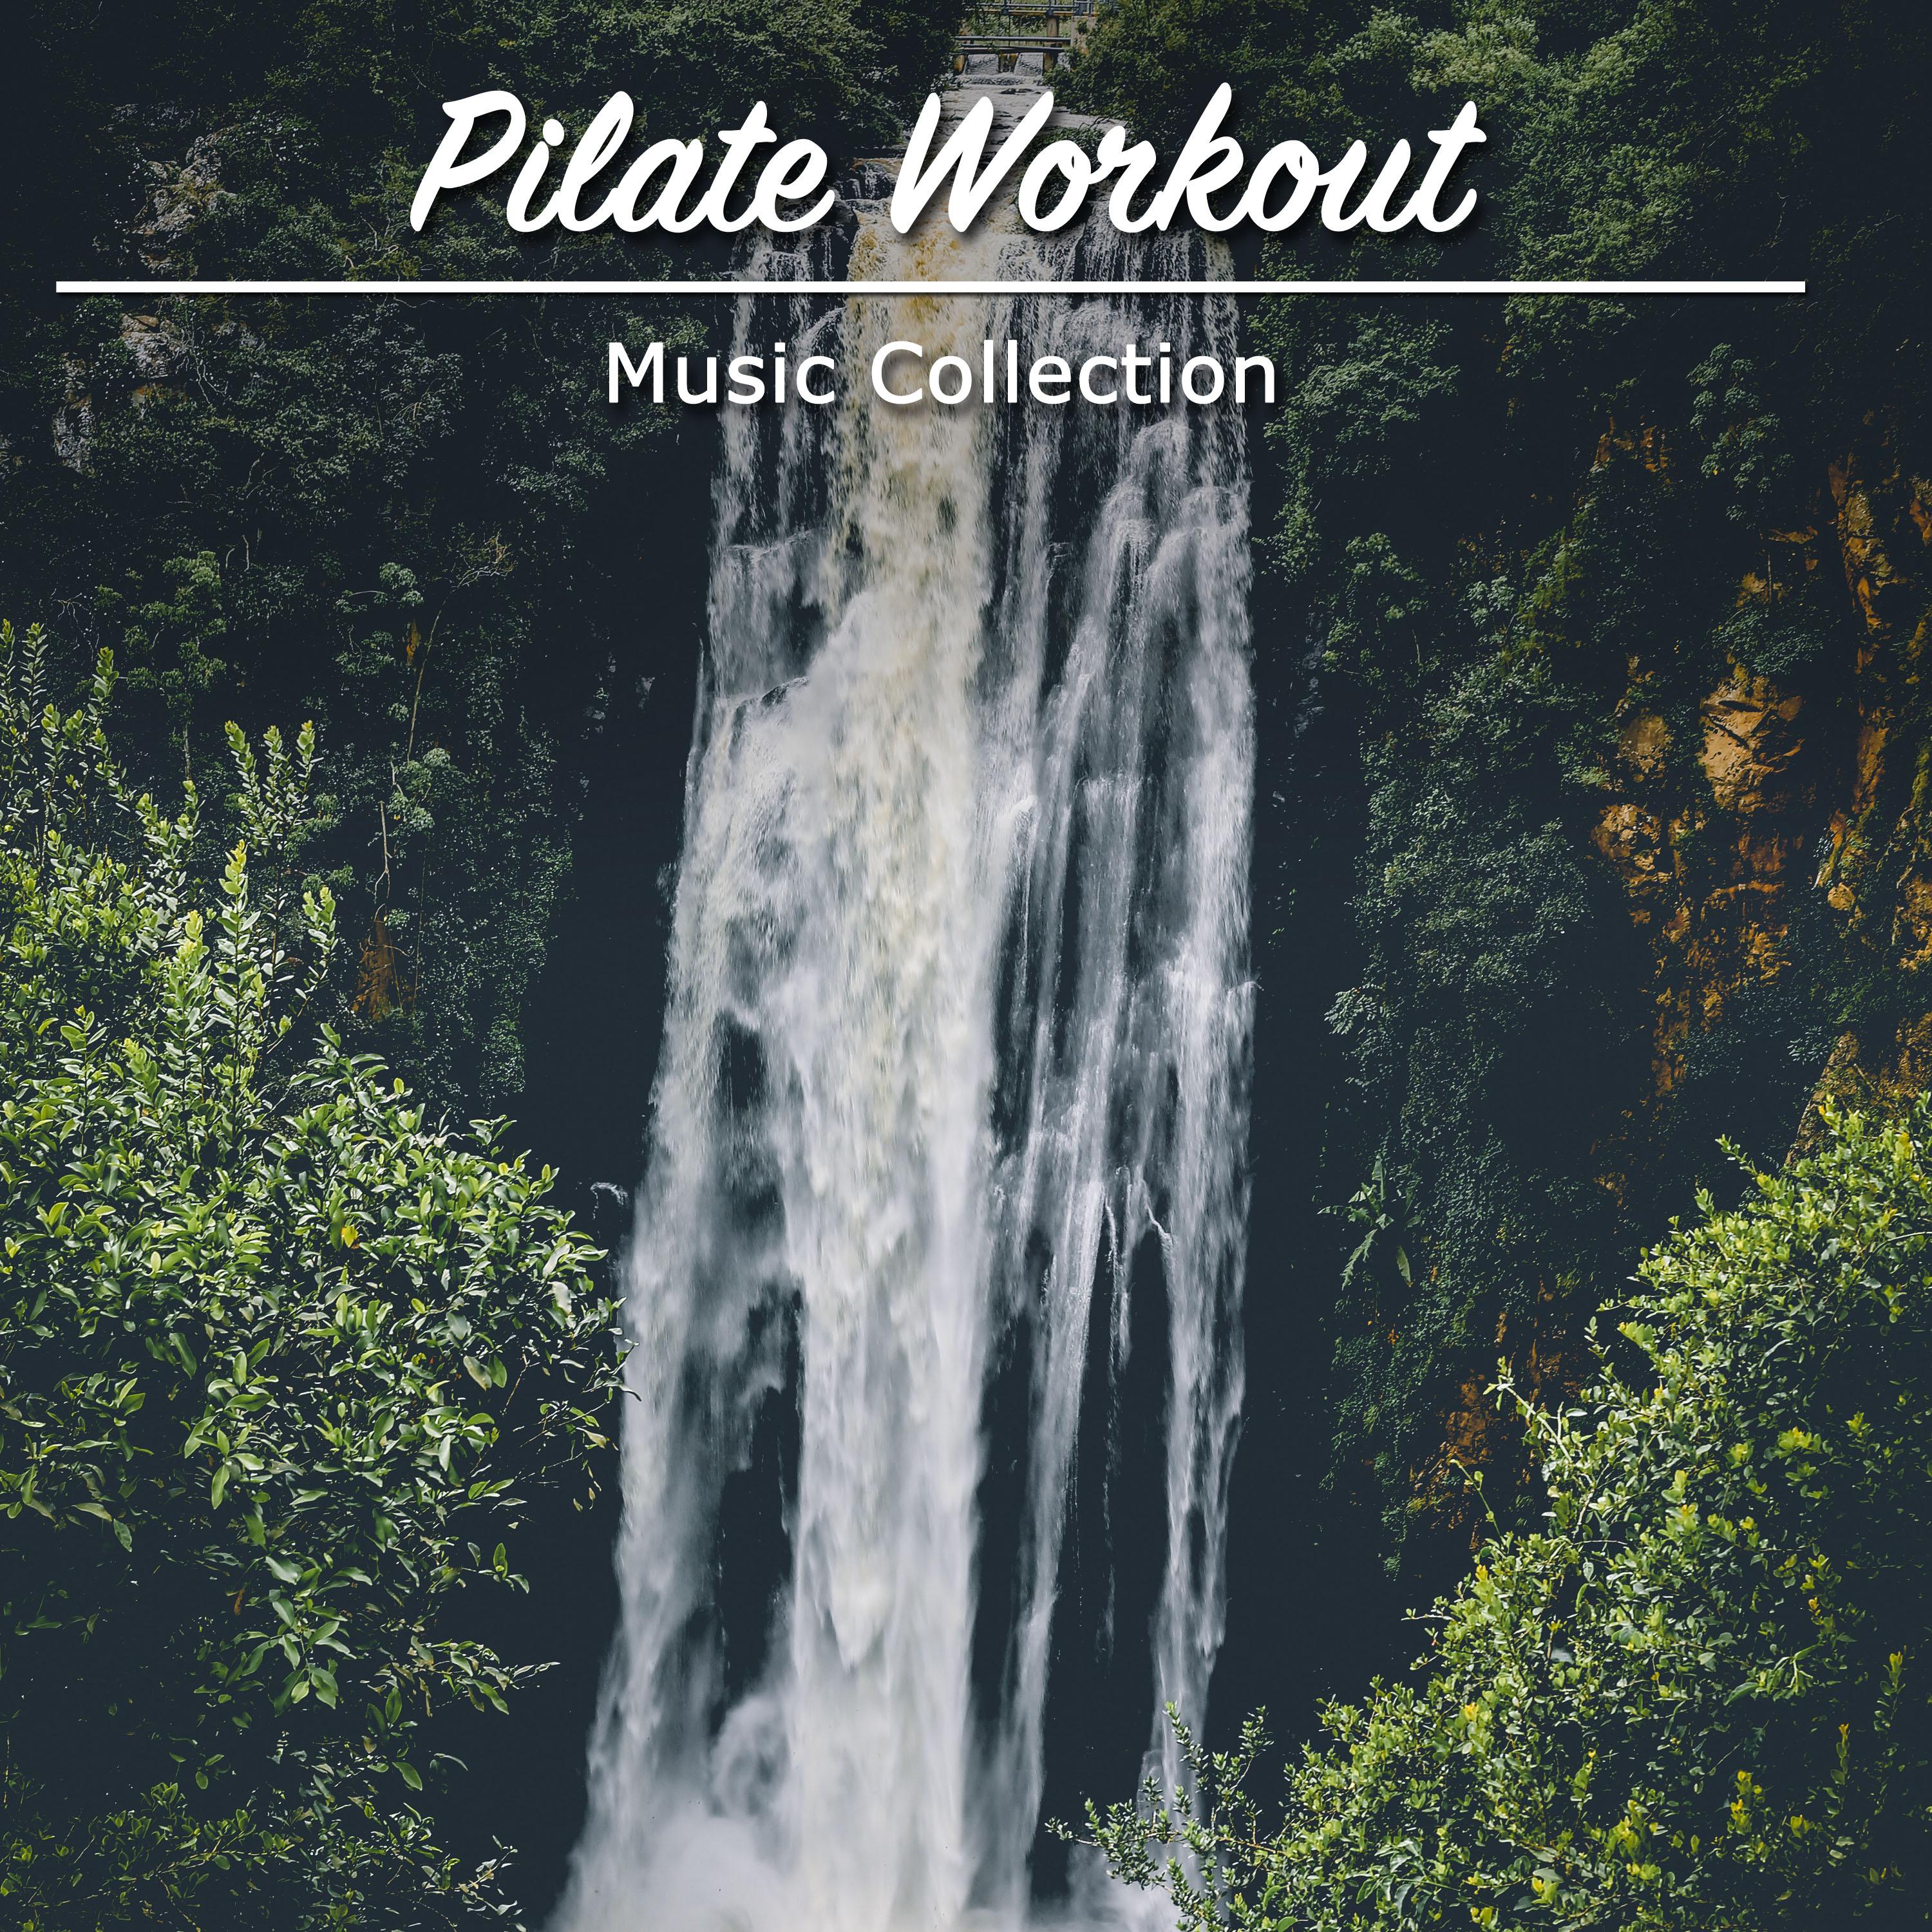 2018 Pilate Workout Music Collection